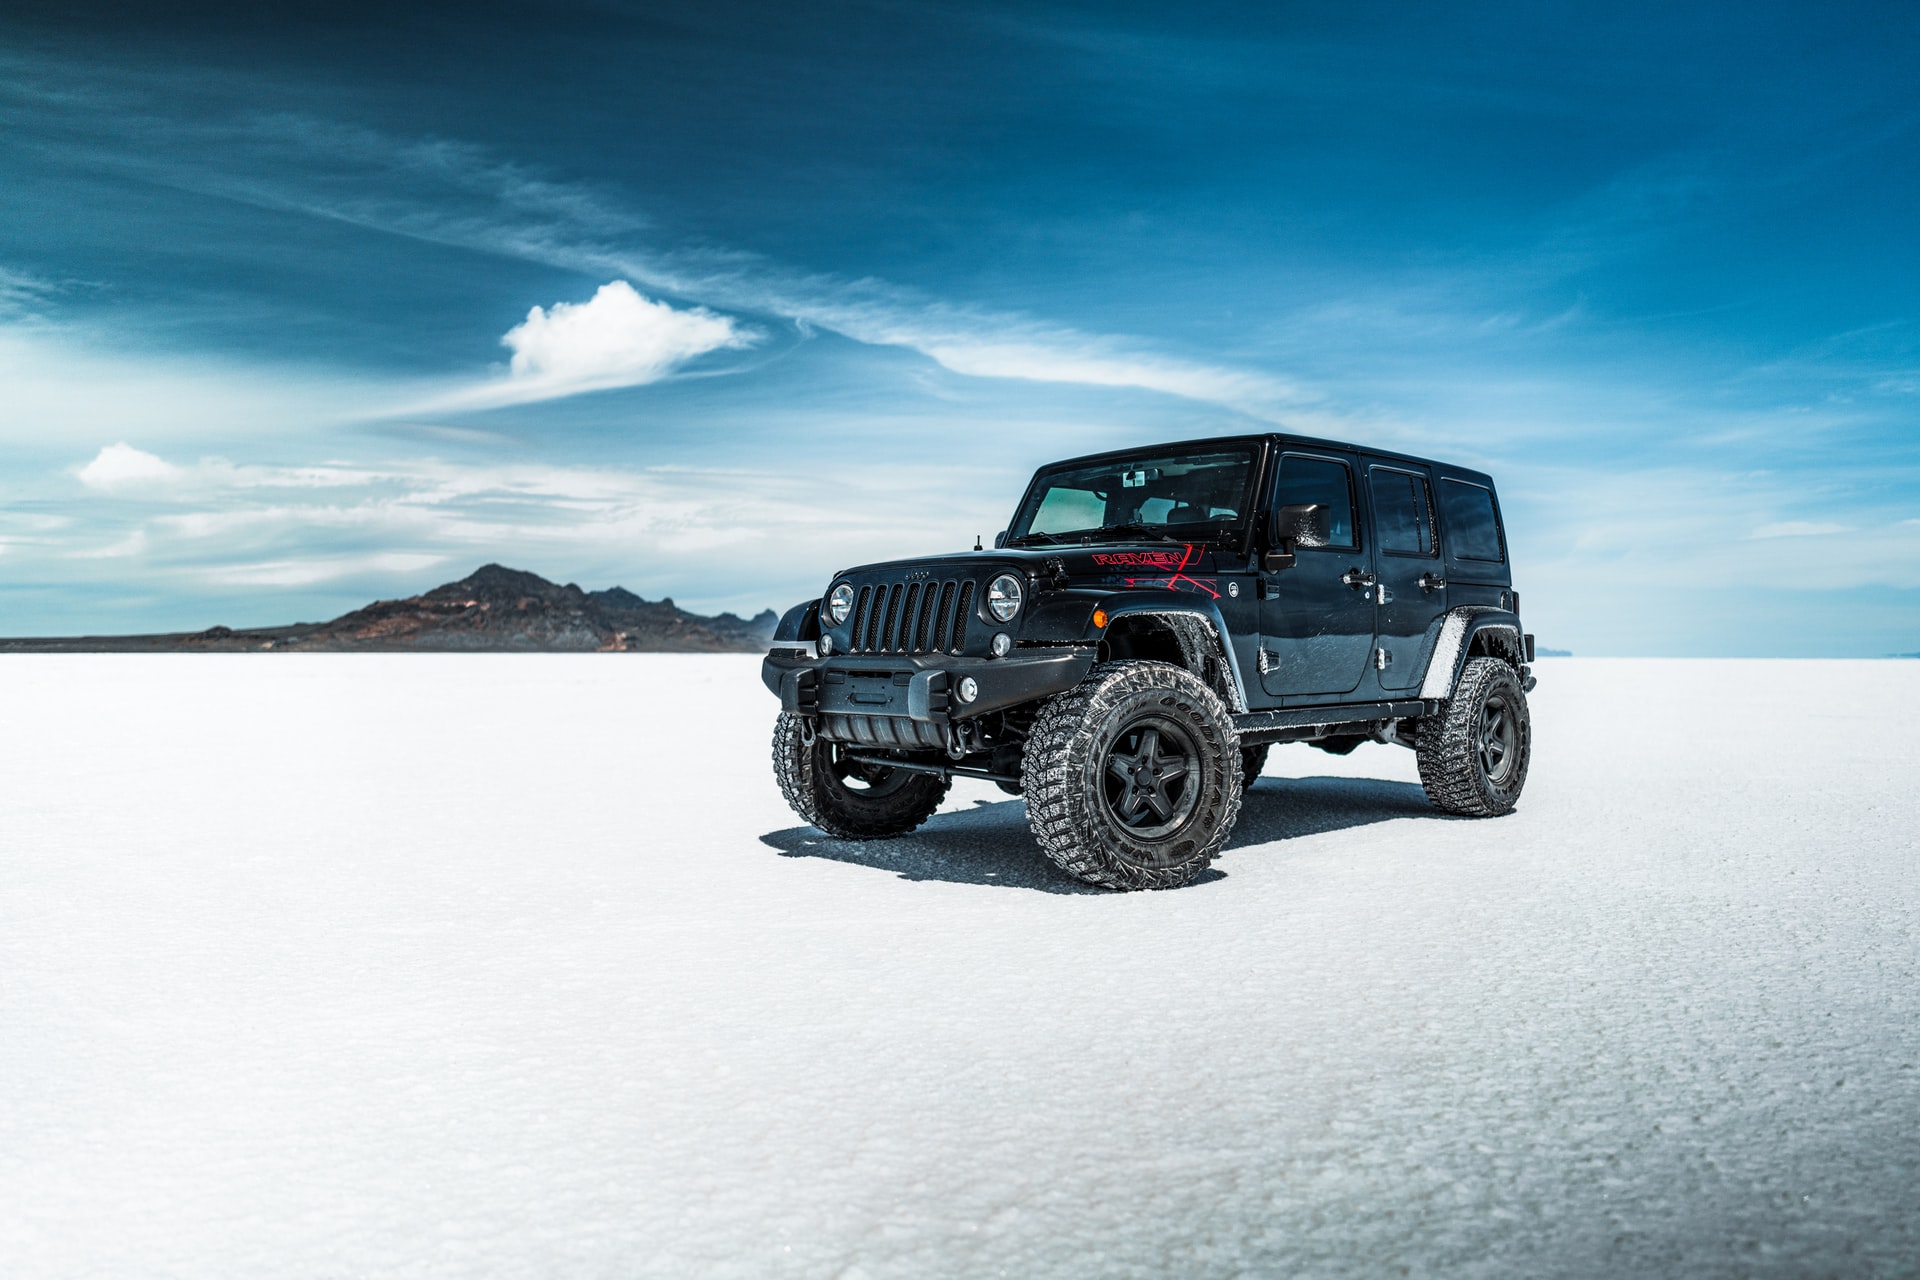 The 5 Best Jeep Wrangler Leveling Kits in 2023